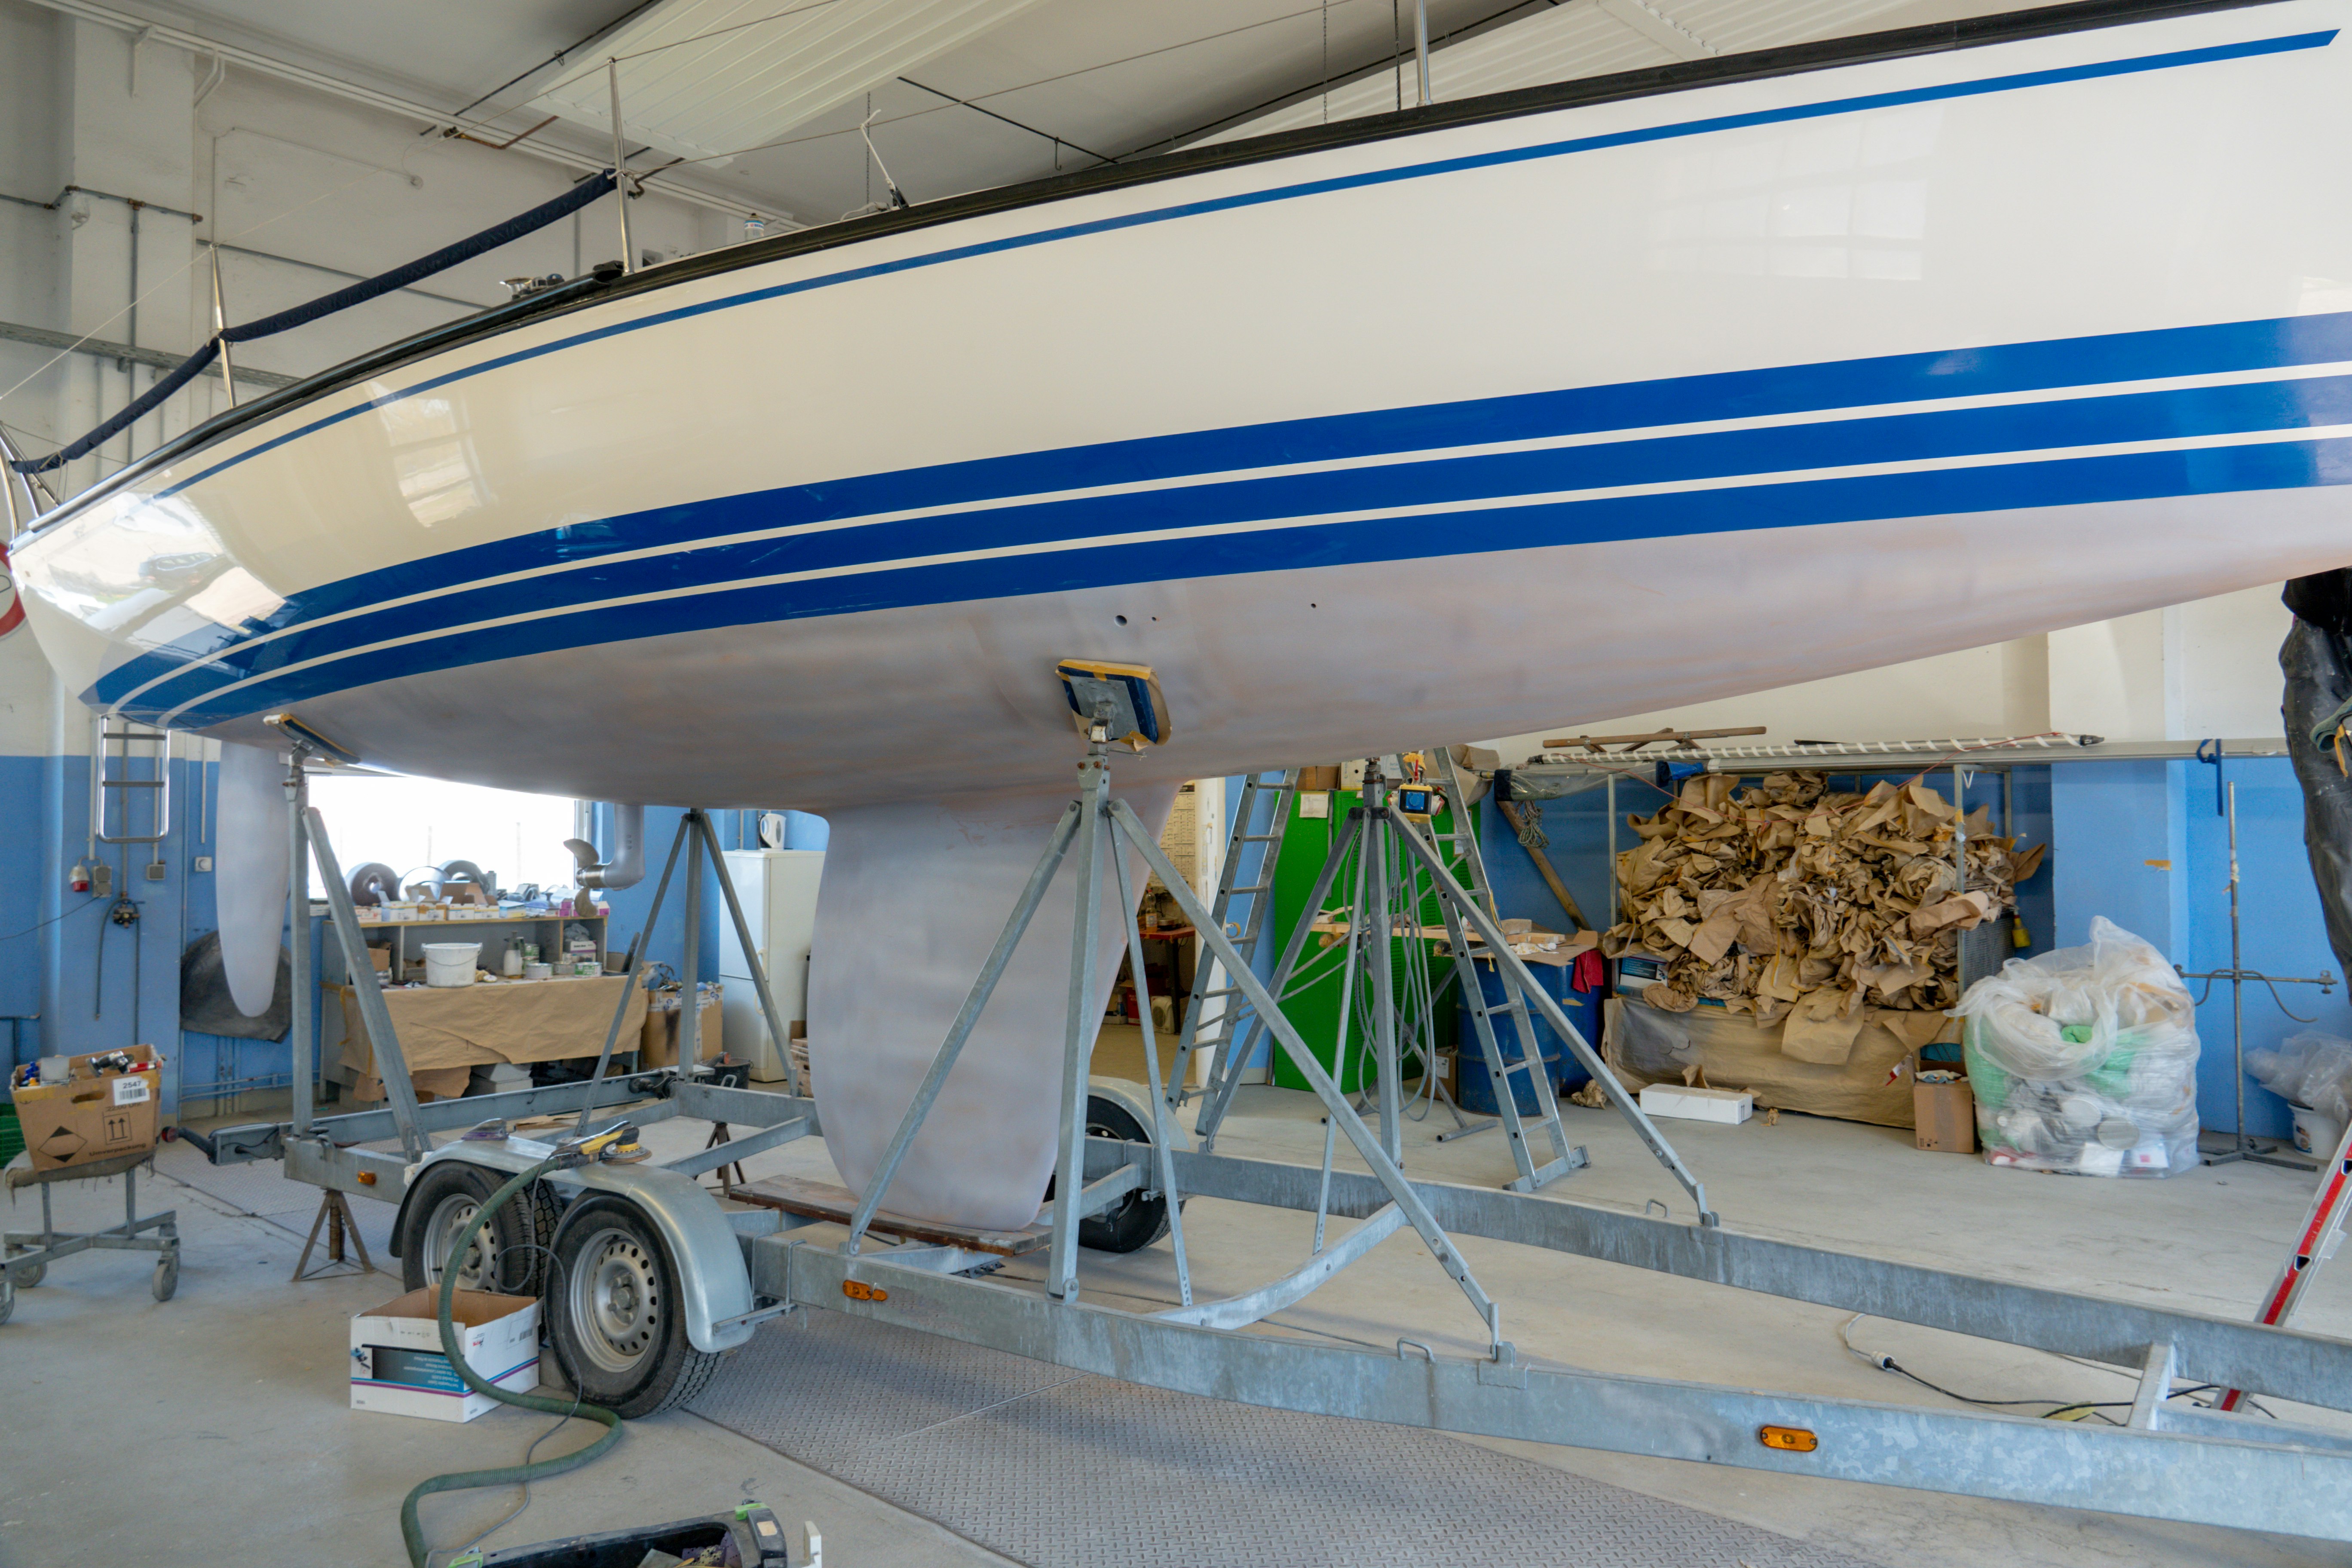 The sailboat sits in the paint shop to be repainted